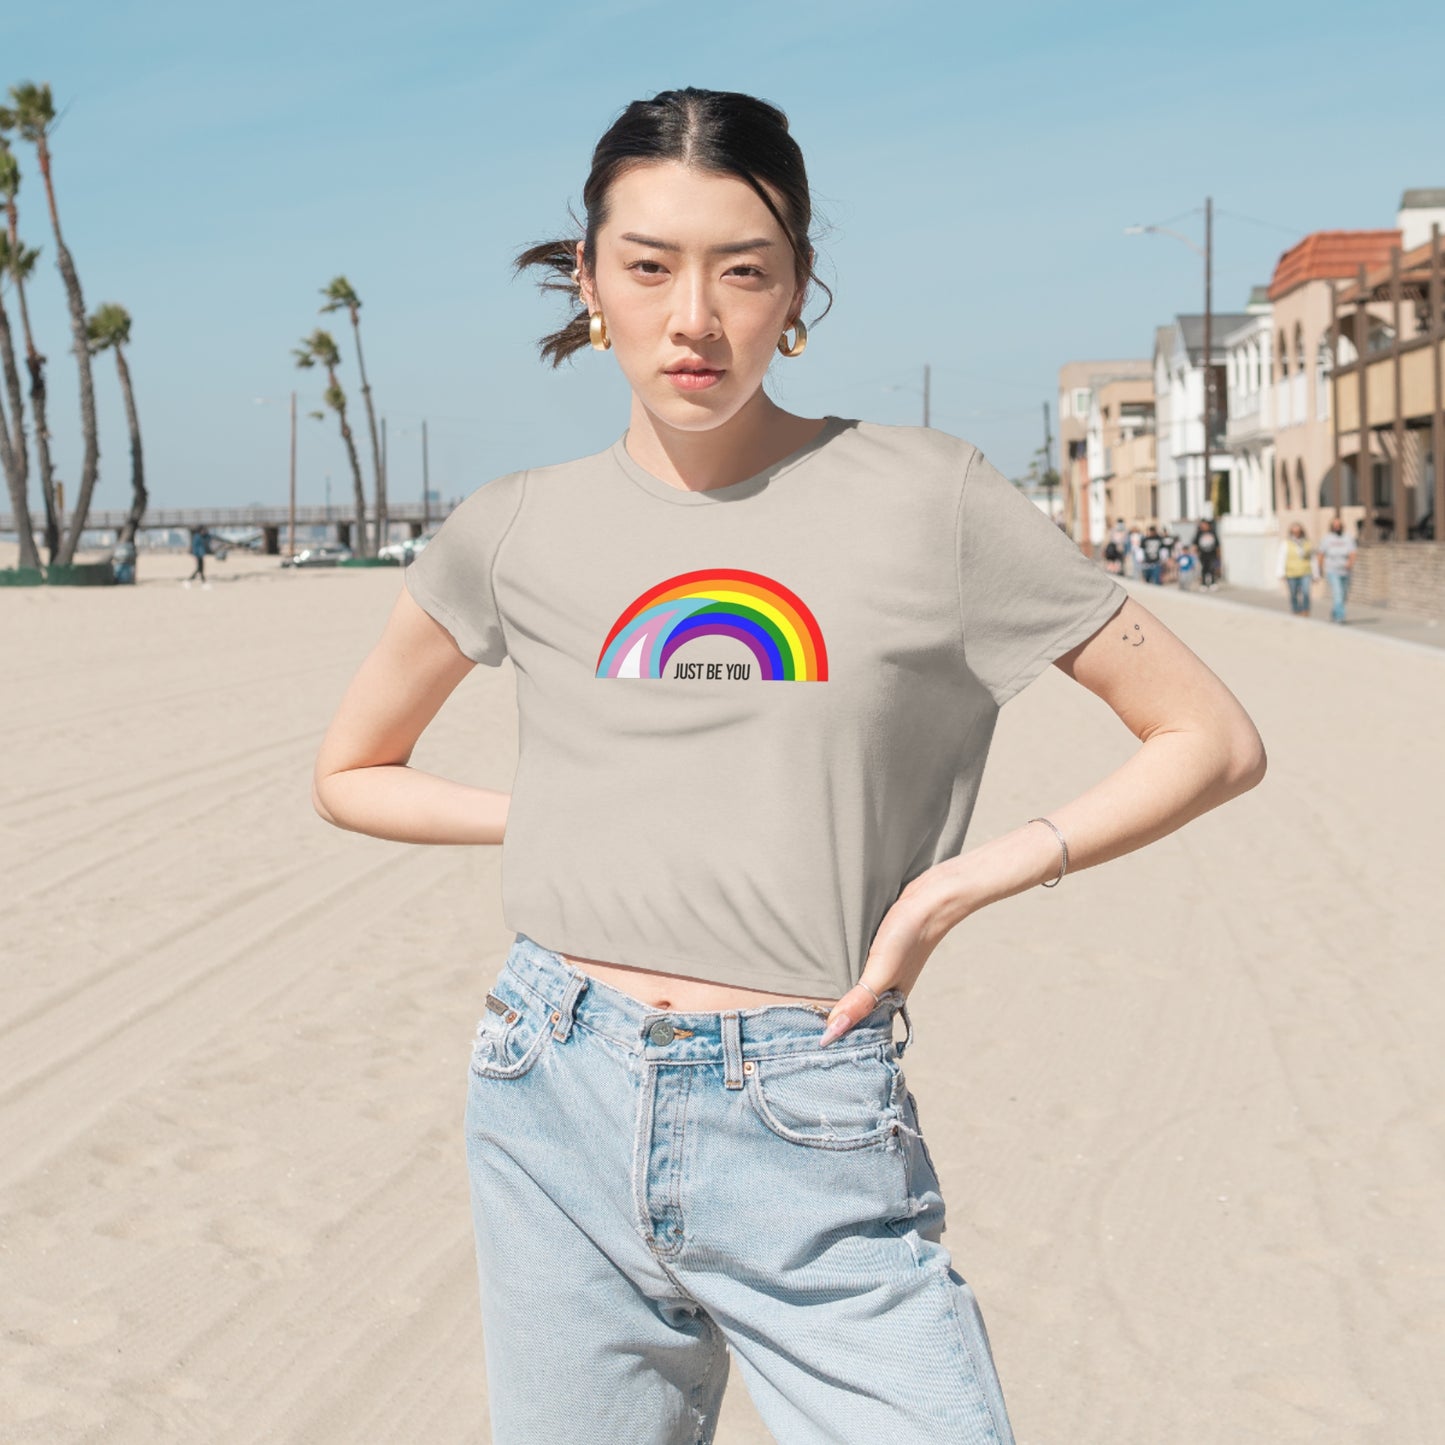 Just Be You Rainbow Flag Flowy Crop Top